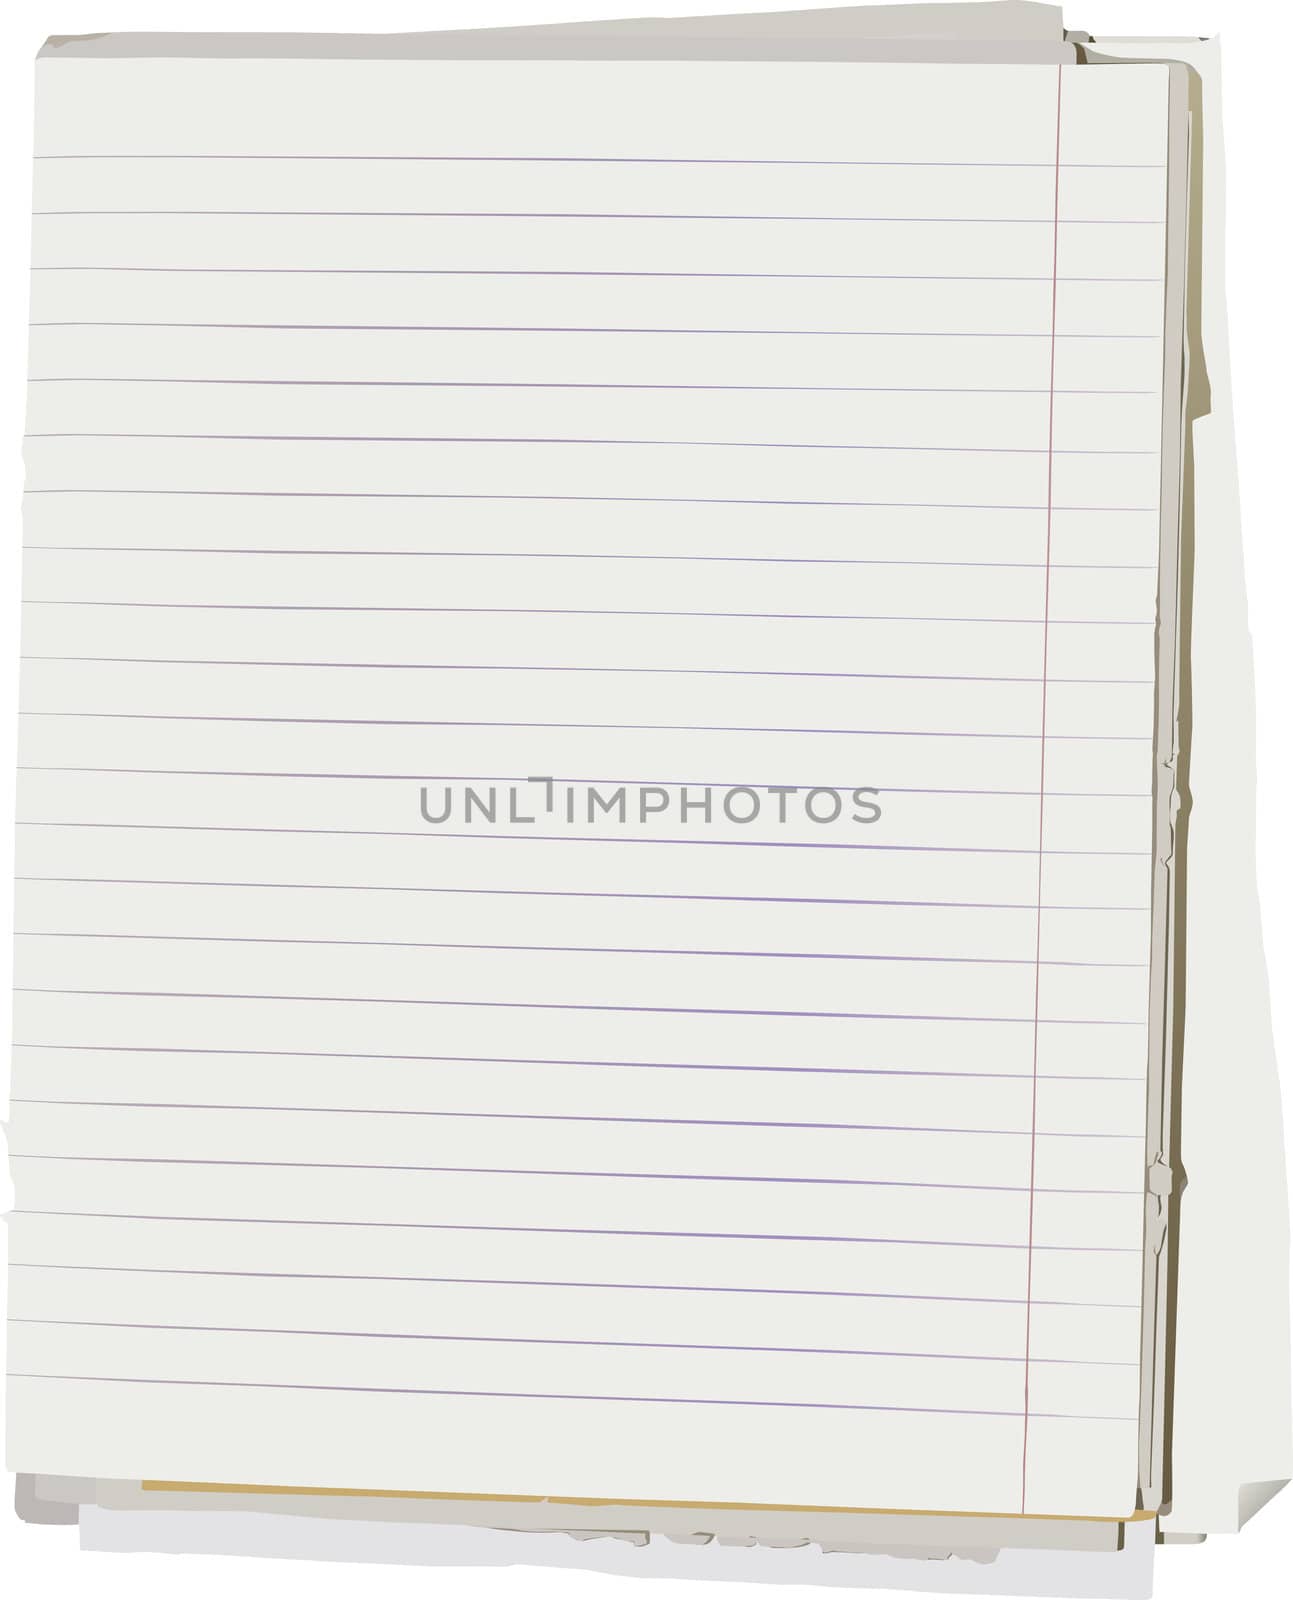 Stack of old lined papers from note book. Clipping path included to easy remove object shadow or replace background.